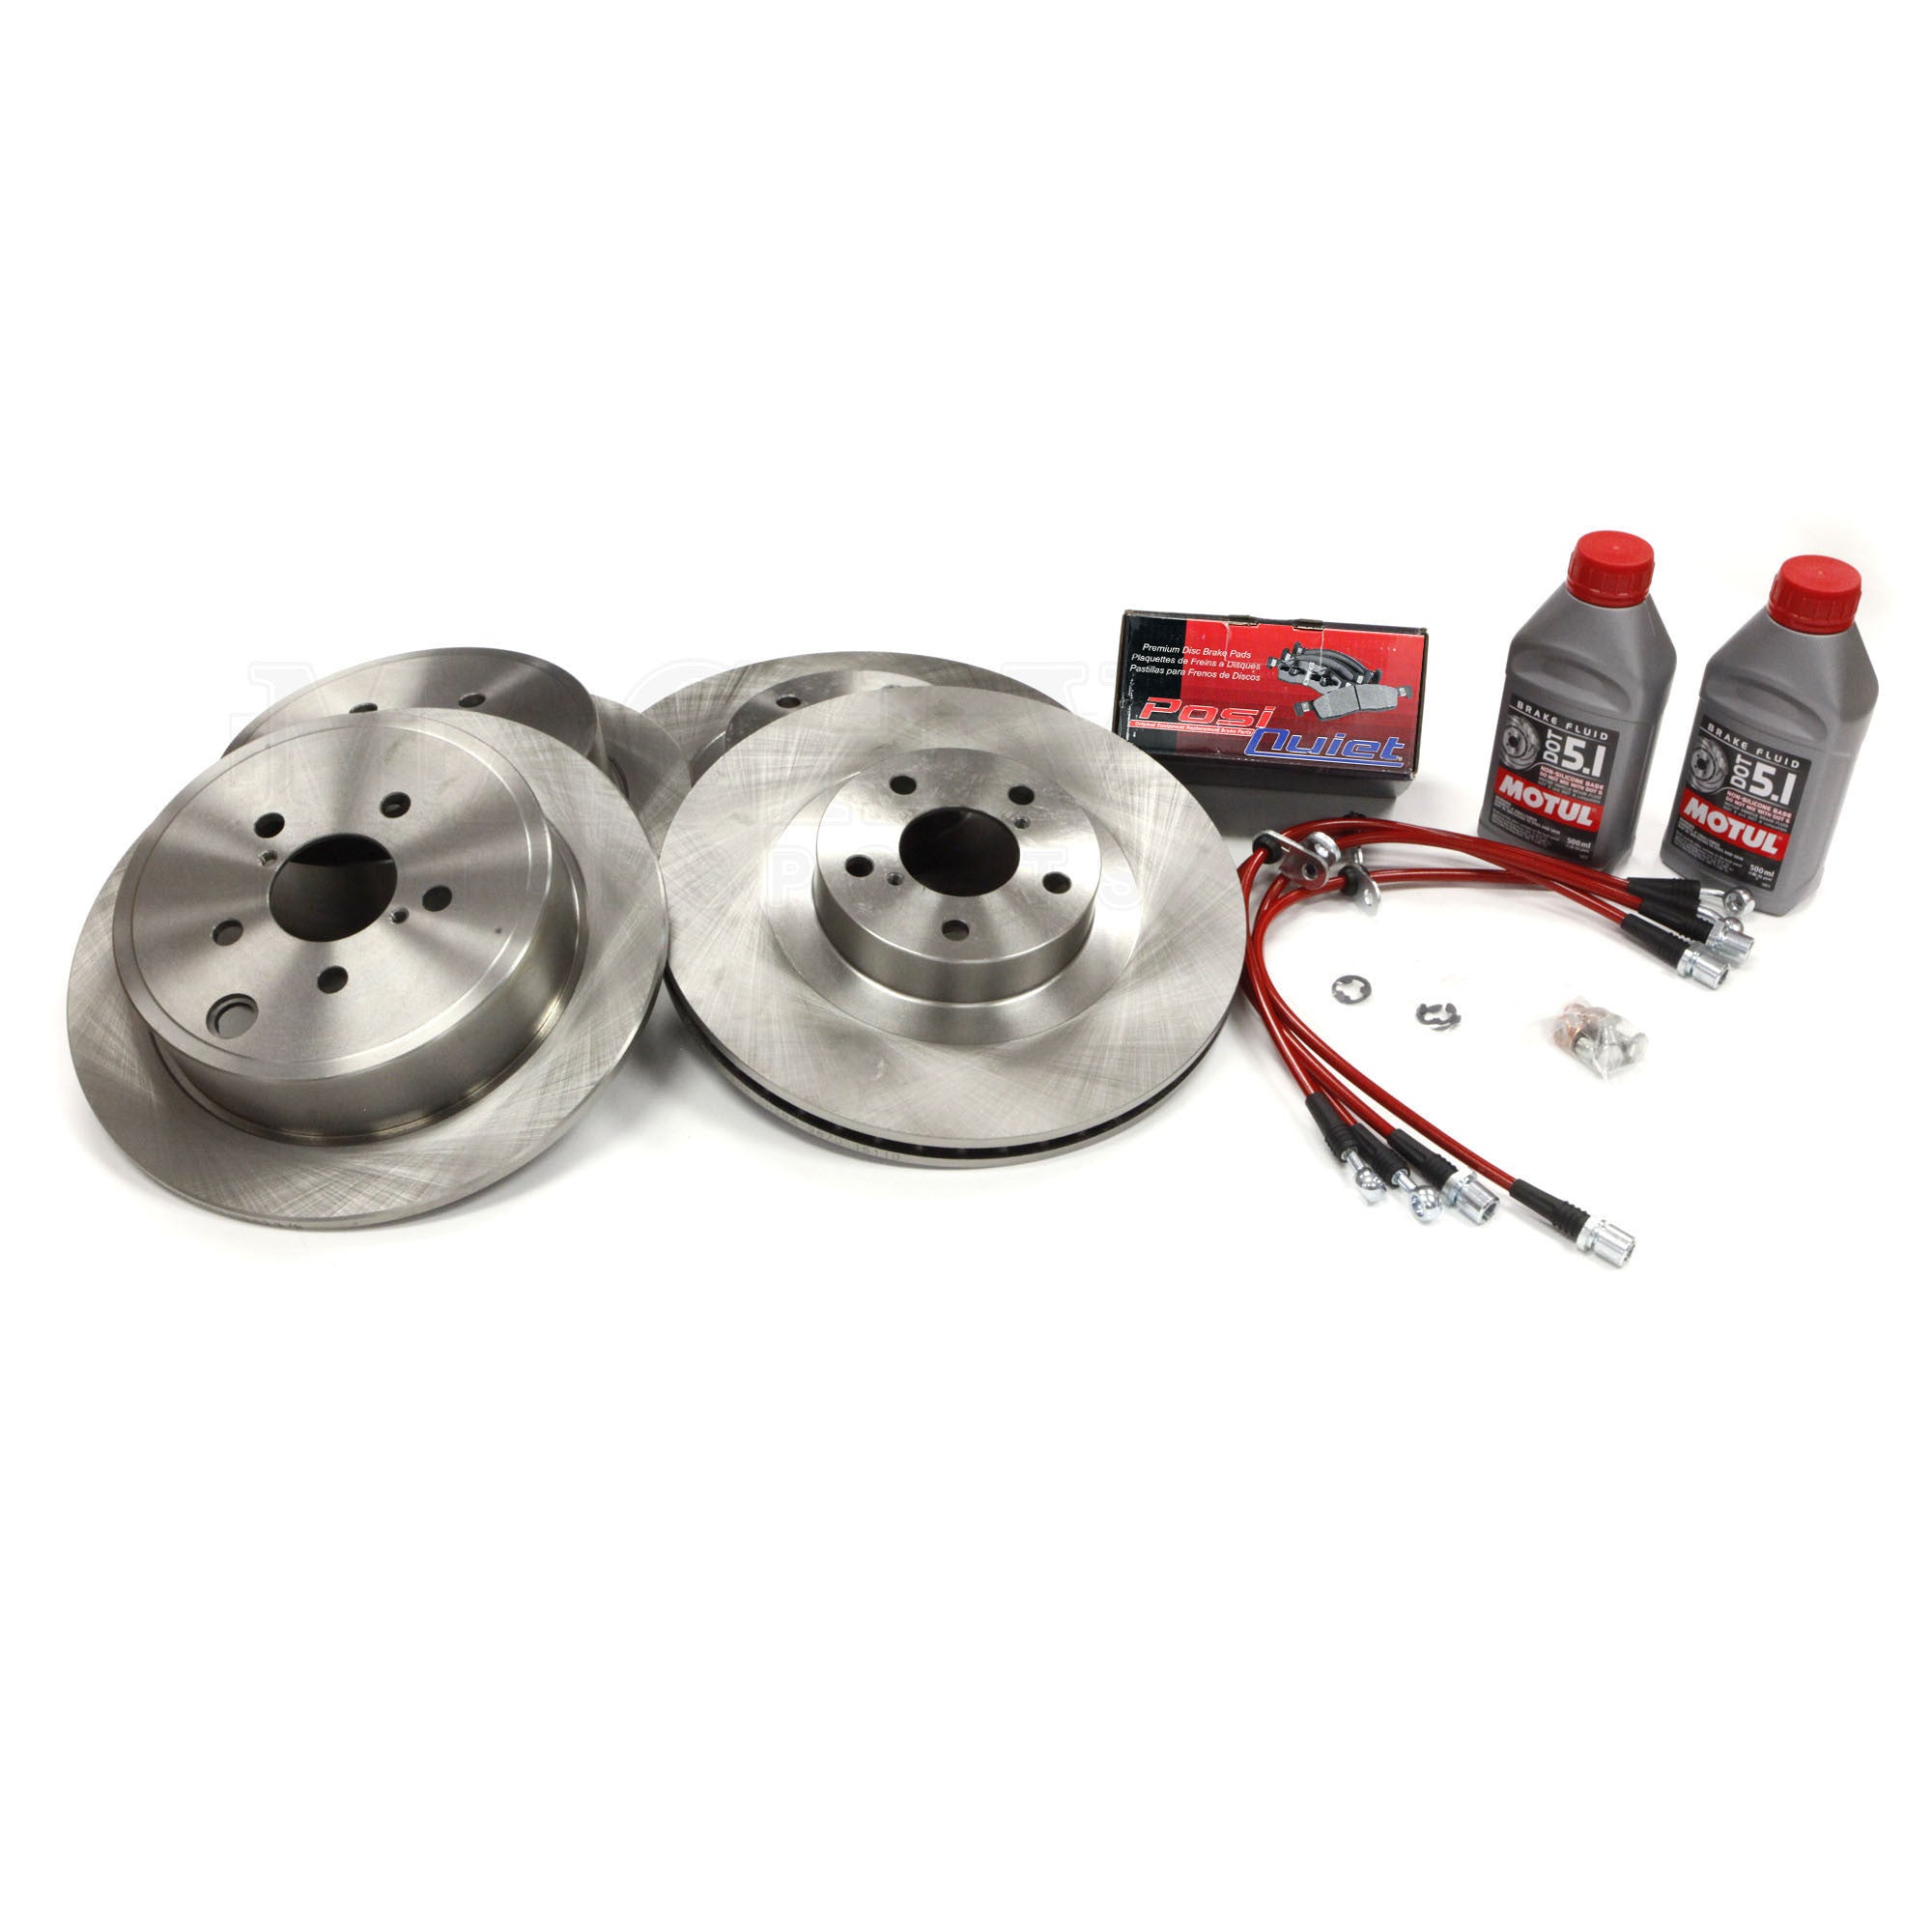 Brake Pad/Rotor Kit 2003 WRX Front/Rear Complete